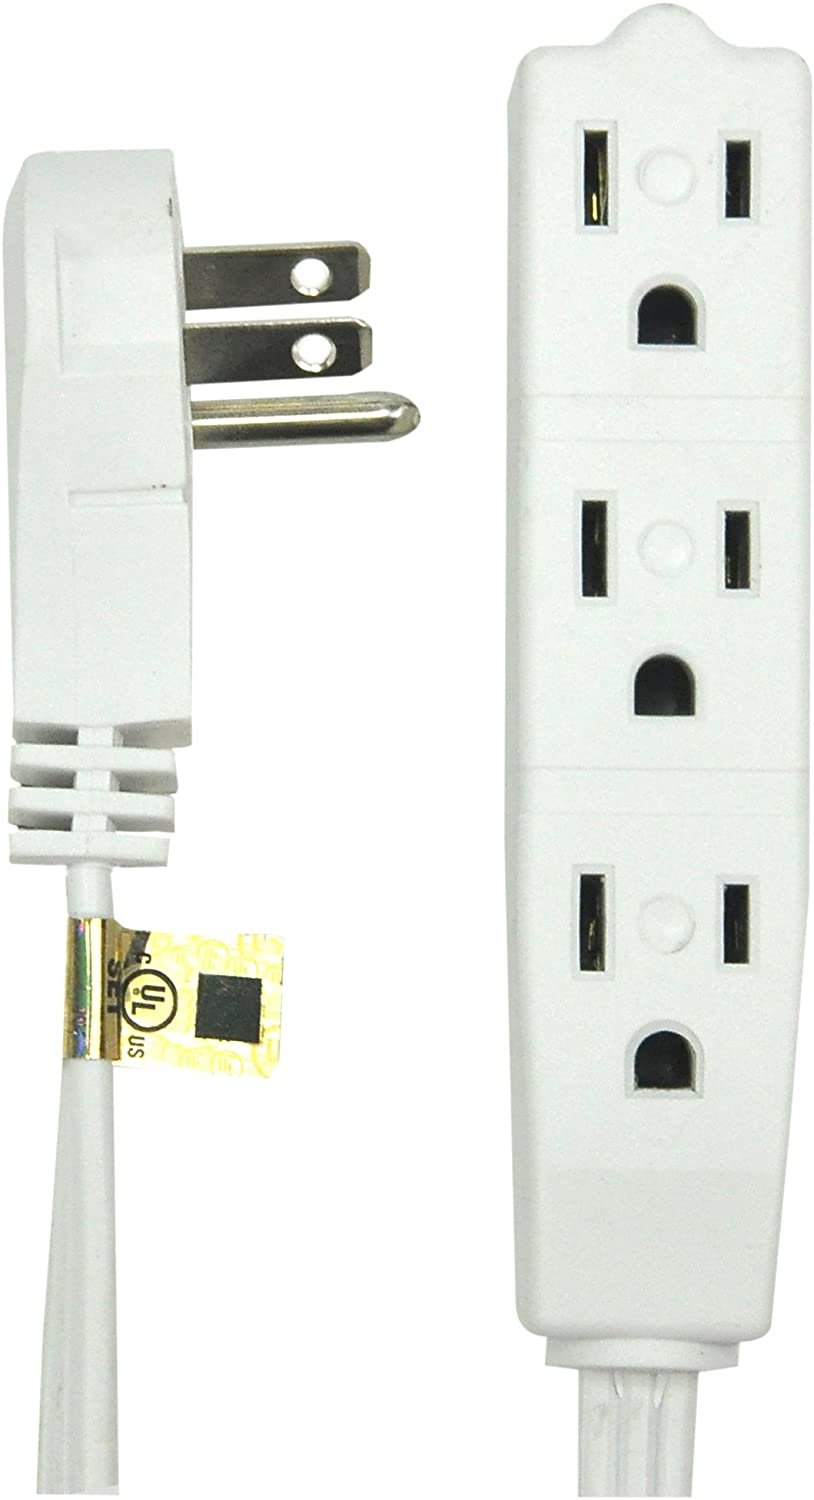 BindMaster 25ft Extension Cord 3 Outlets, 3Prong Grounded, Angled Flat Plug, White